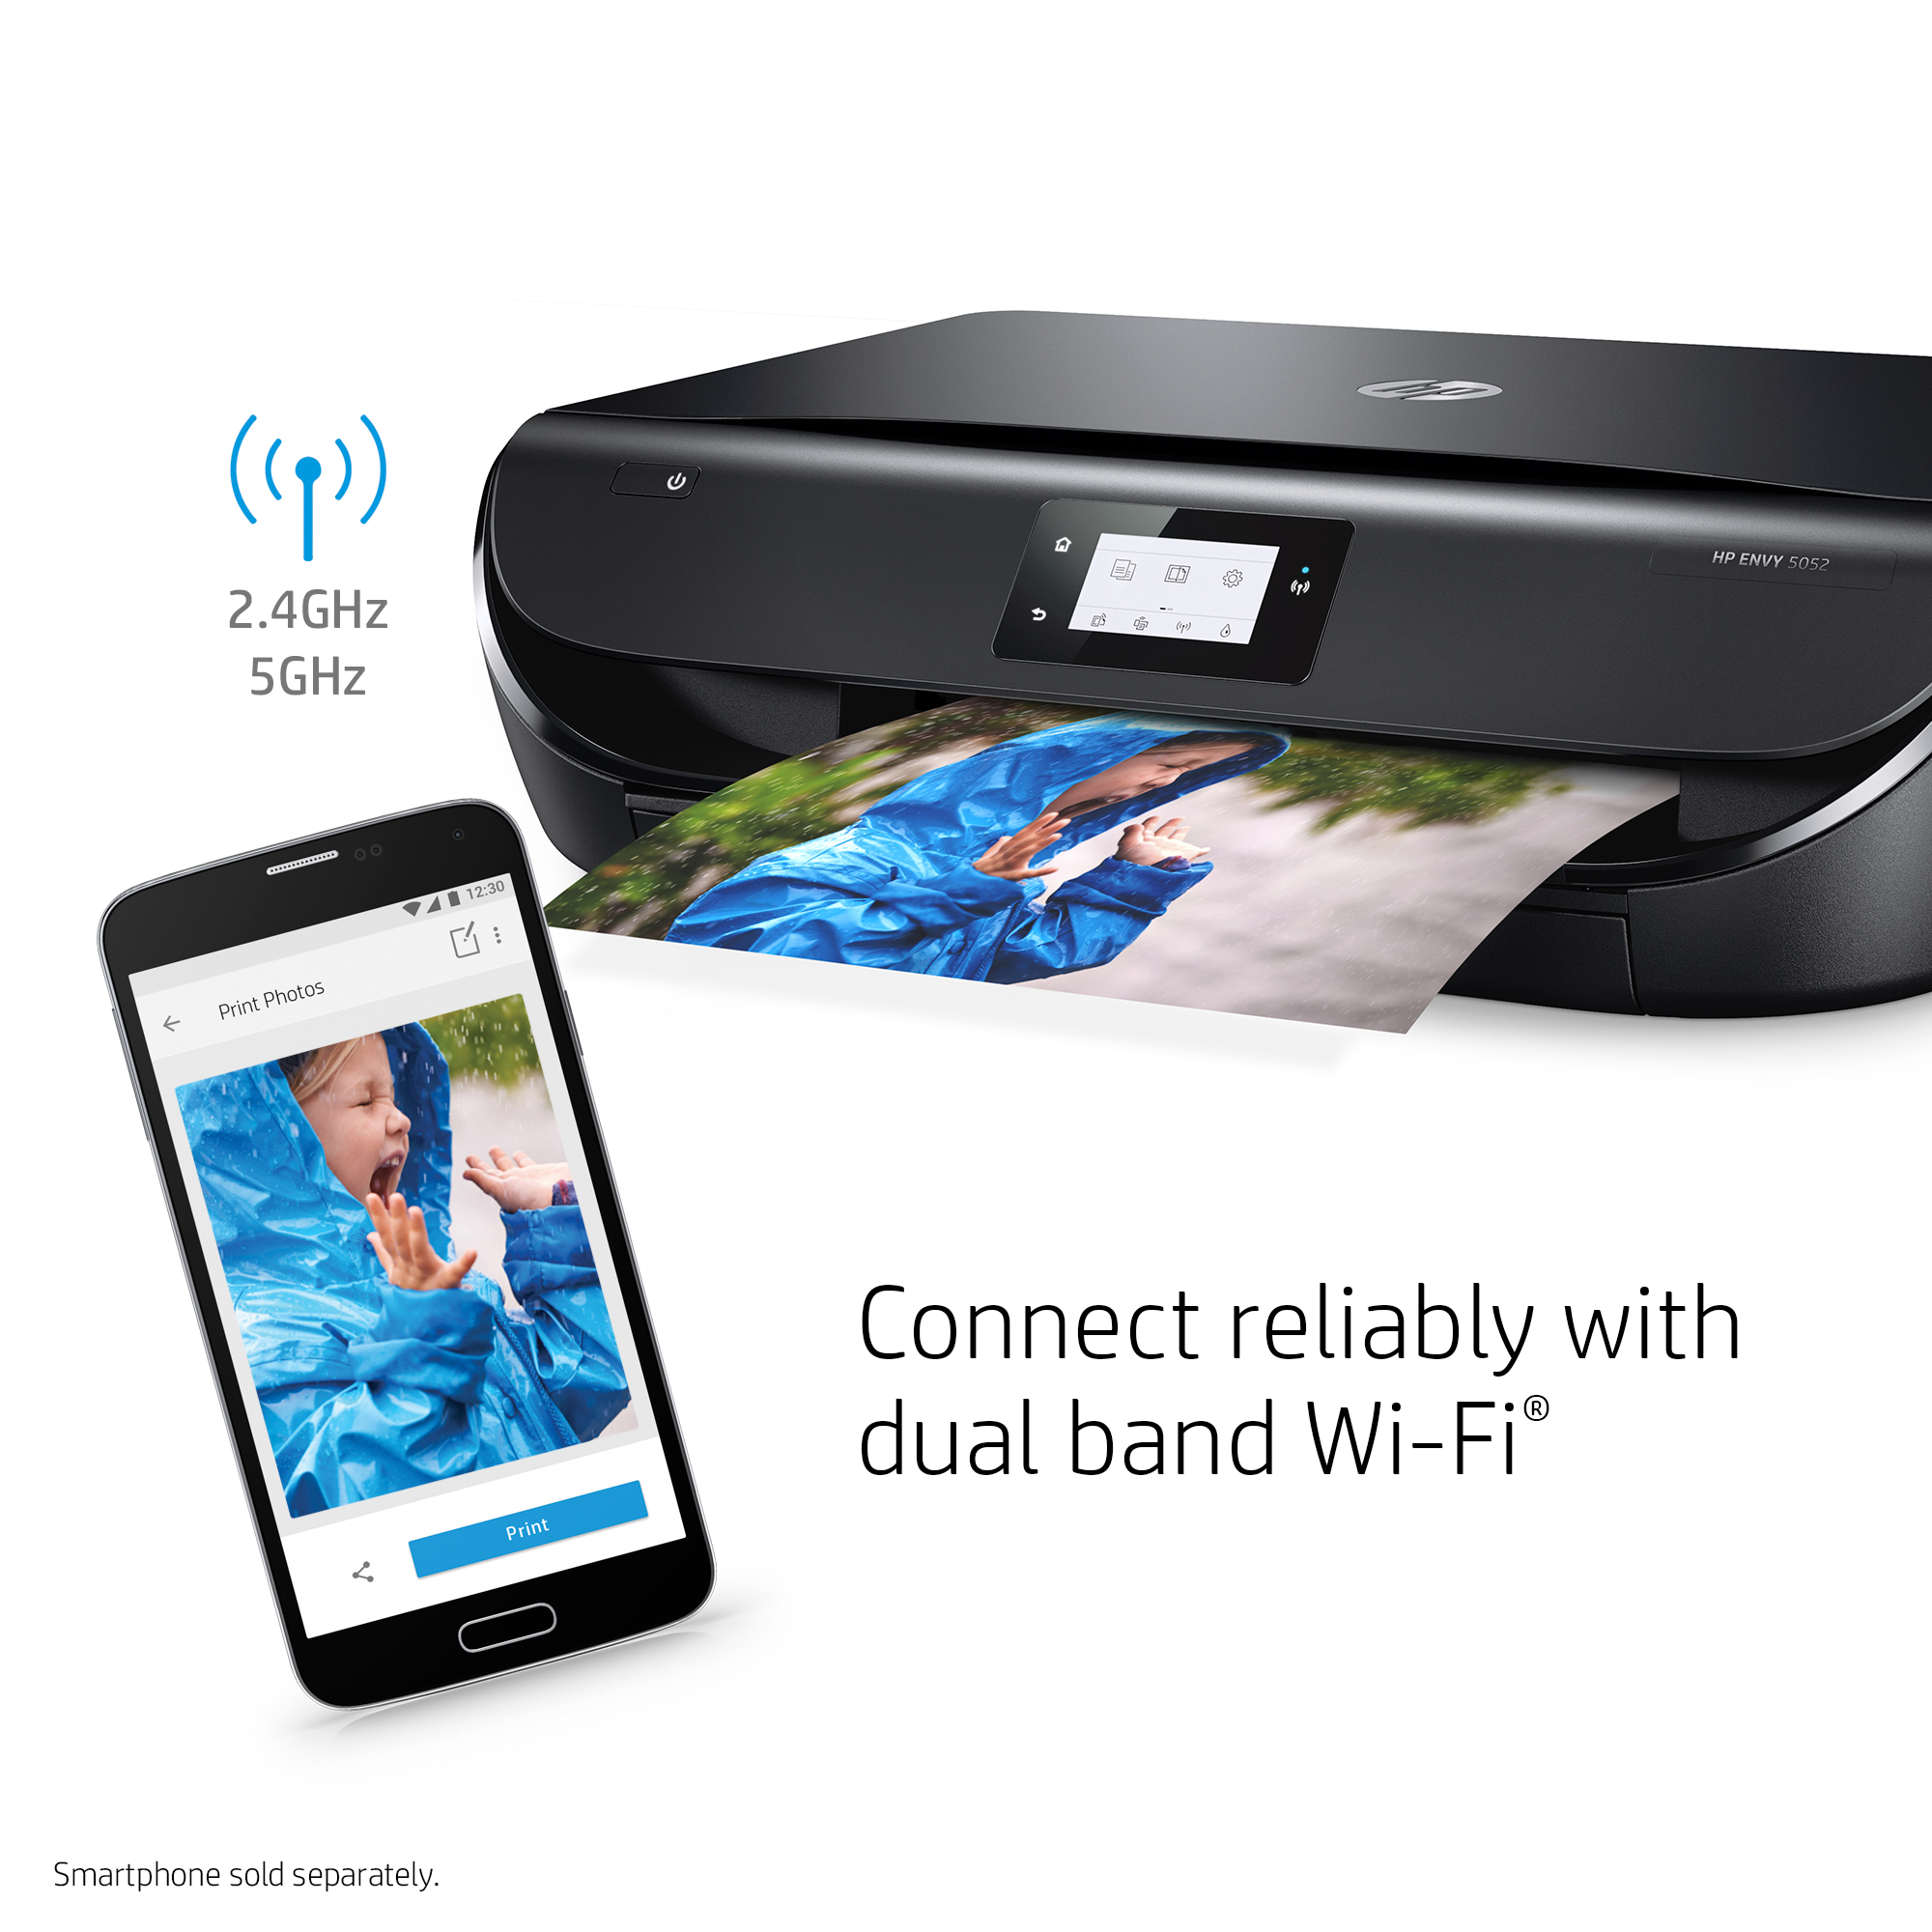 Hp Envy 5052 All-In-One Wireless Color Inkjet Printer (M2U92A) Dual Band Wifi Borderless Photos, Auto 2-Sided Printing, Black - image 4 of 9